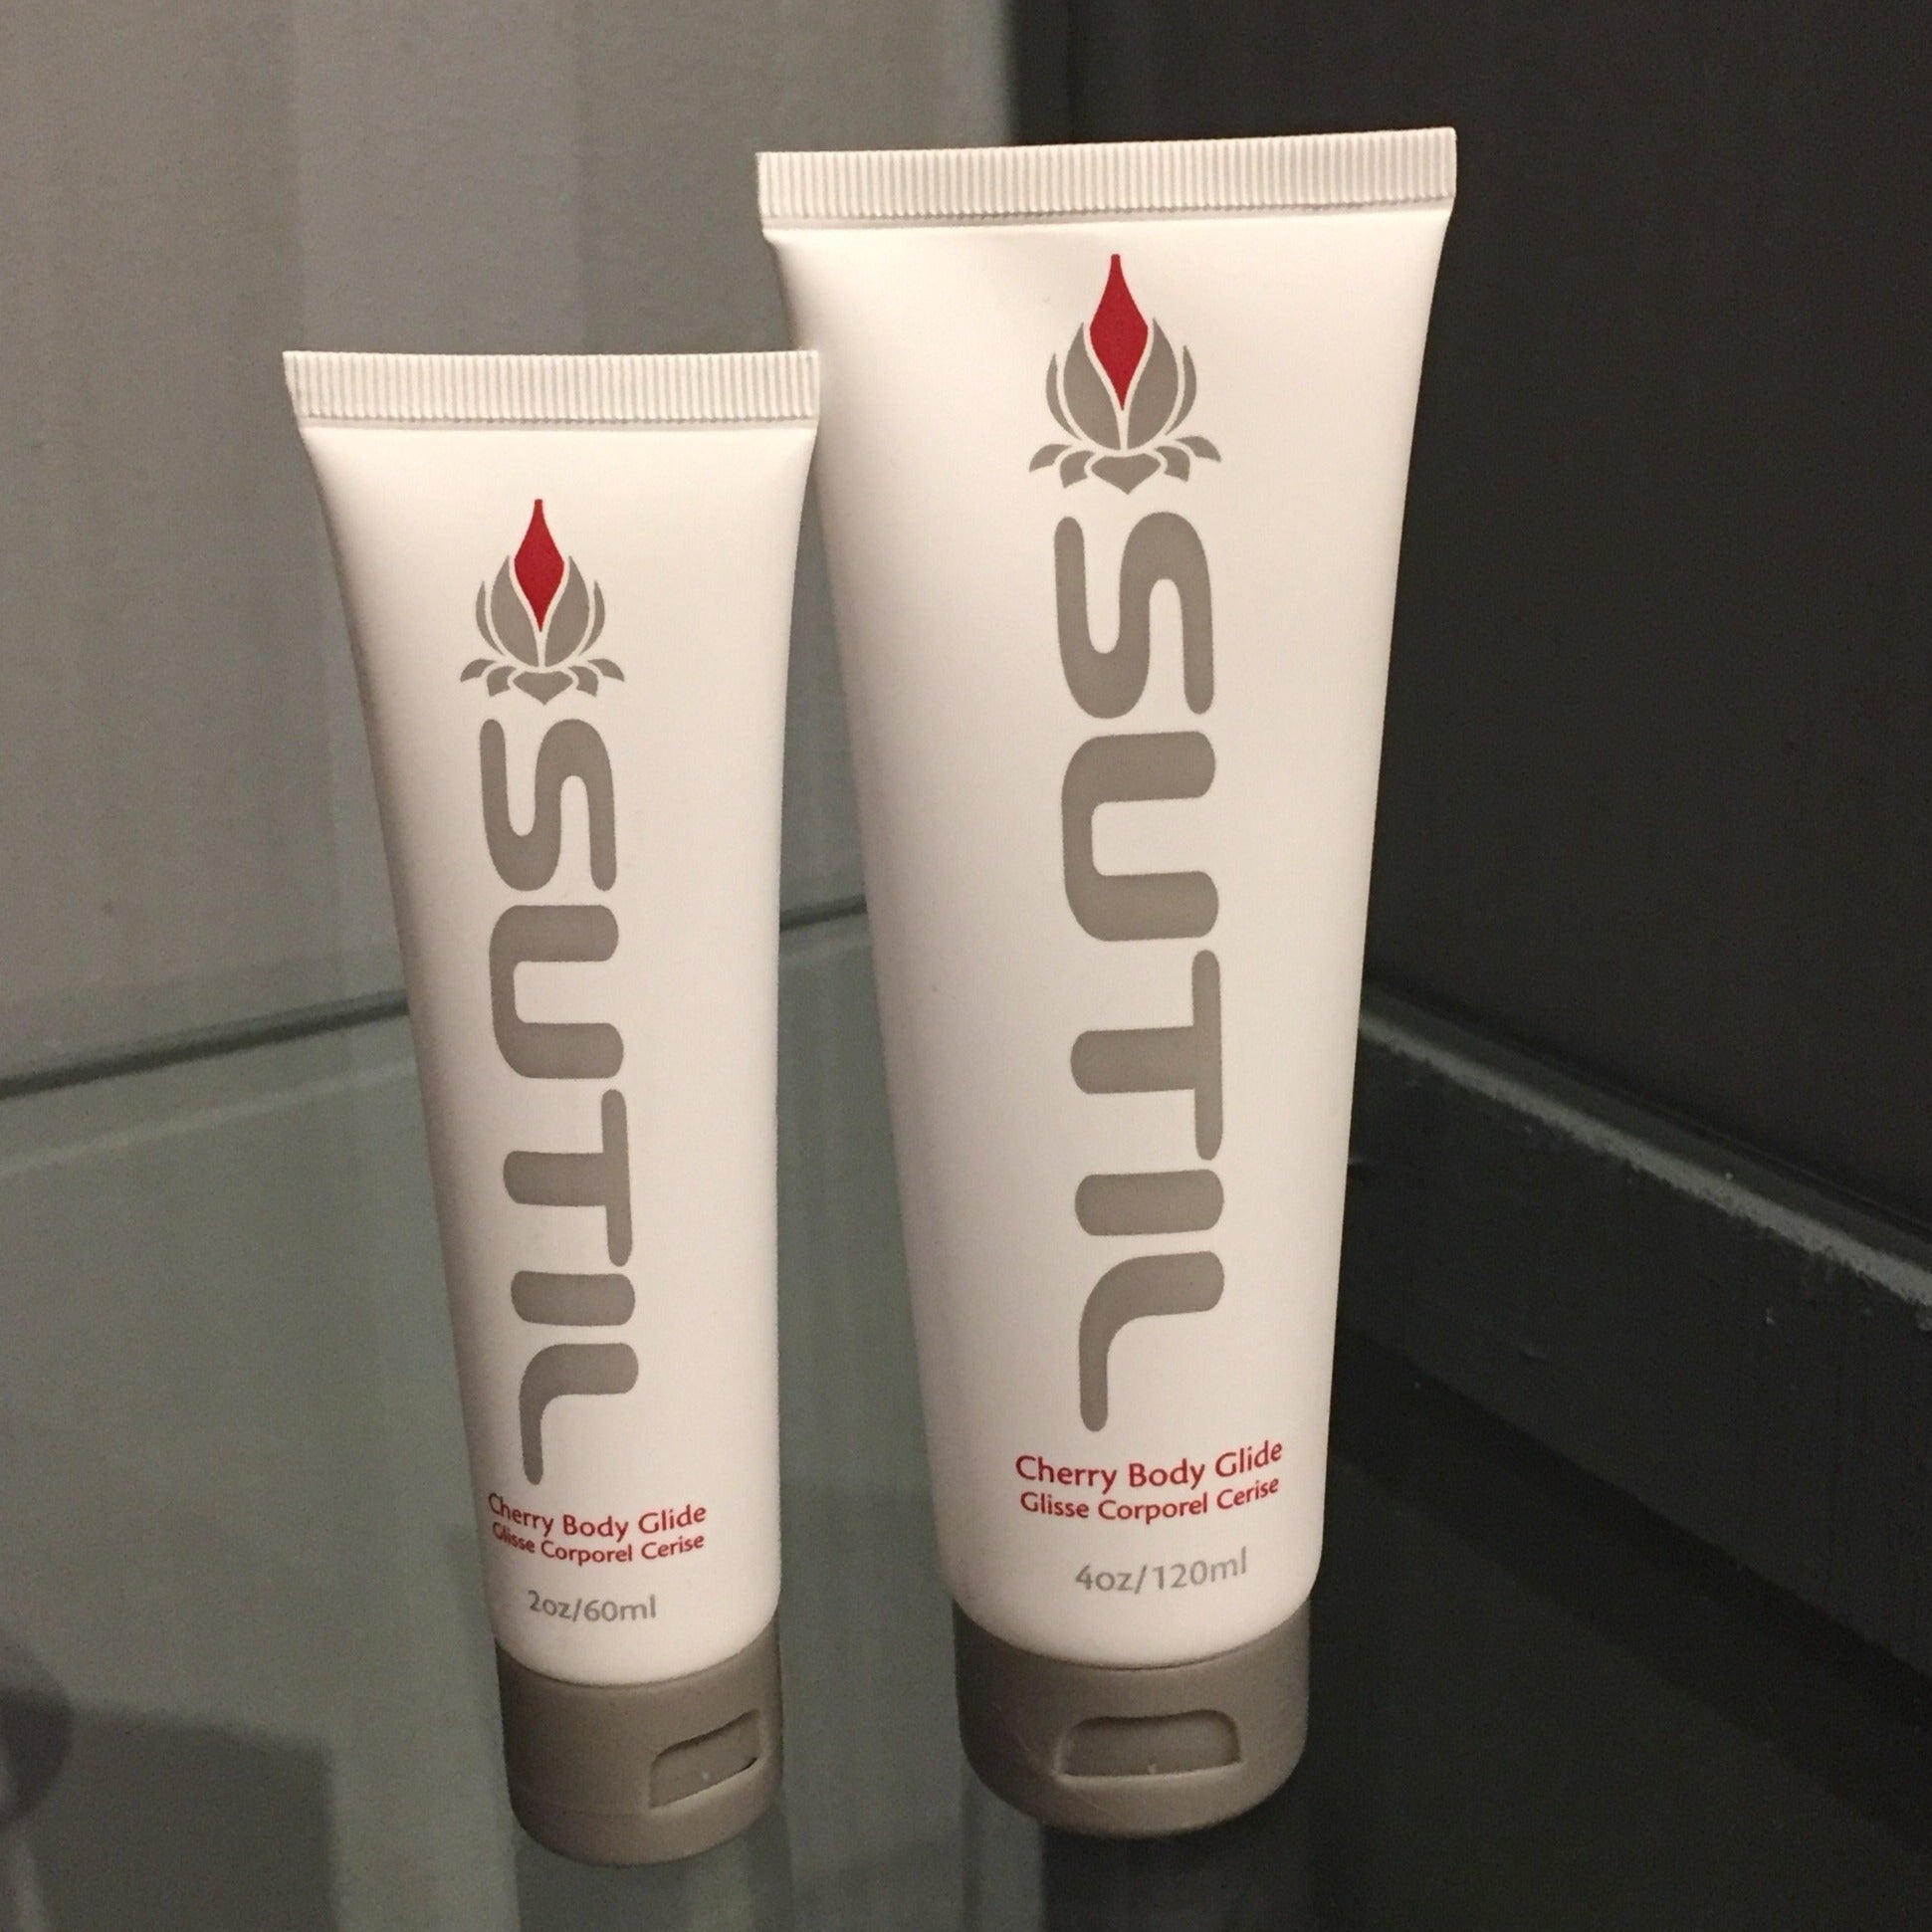 Sutil Flavoured Body Glide Cherry in 2oz and 4oz bottles.